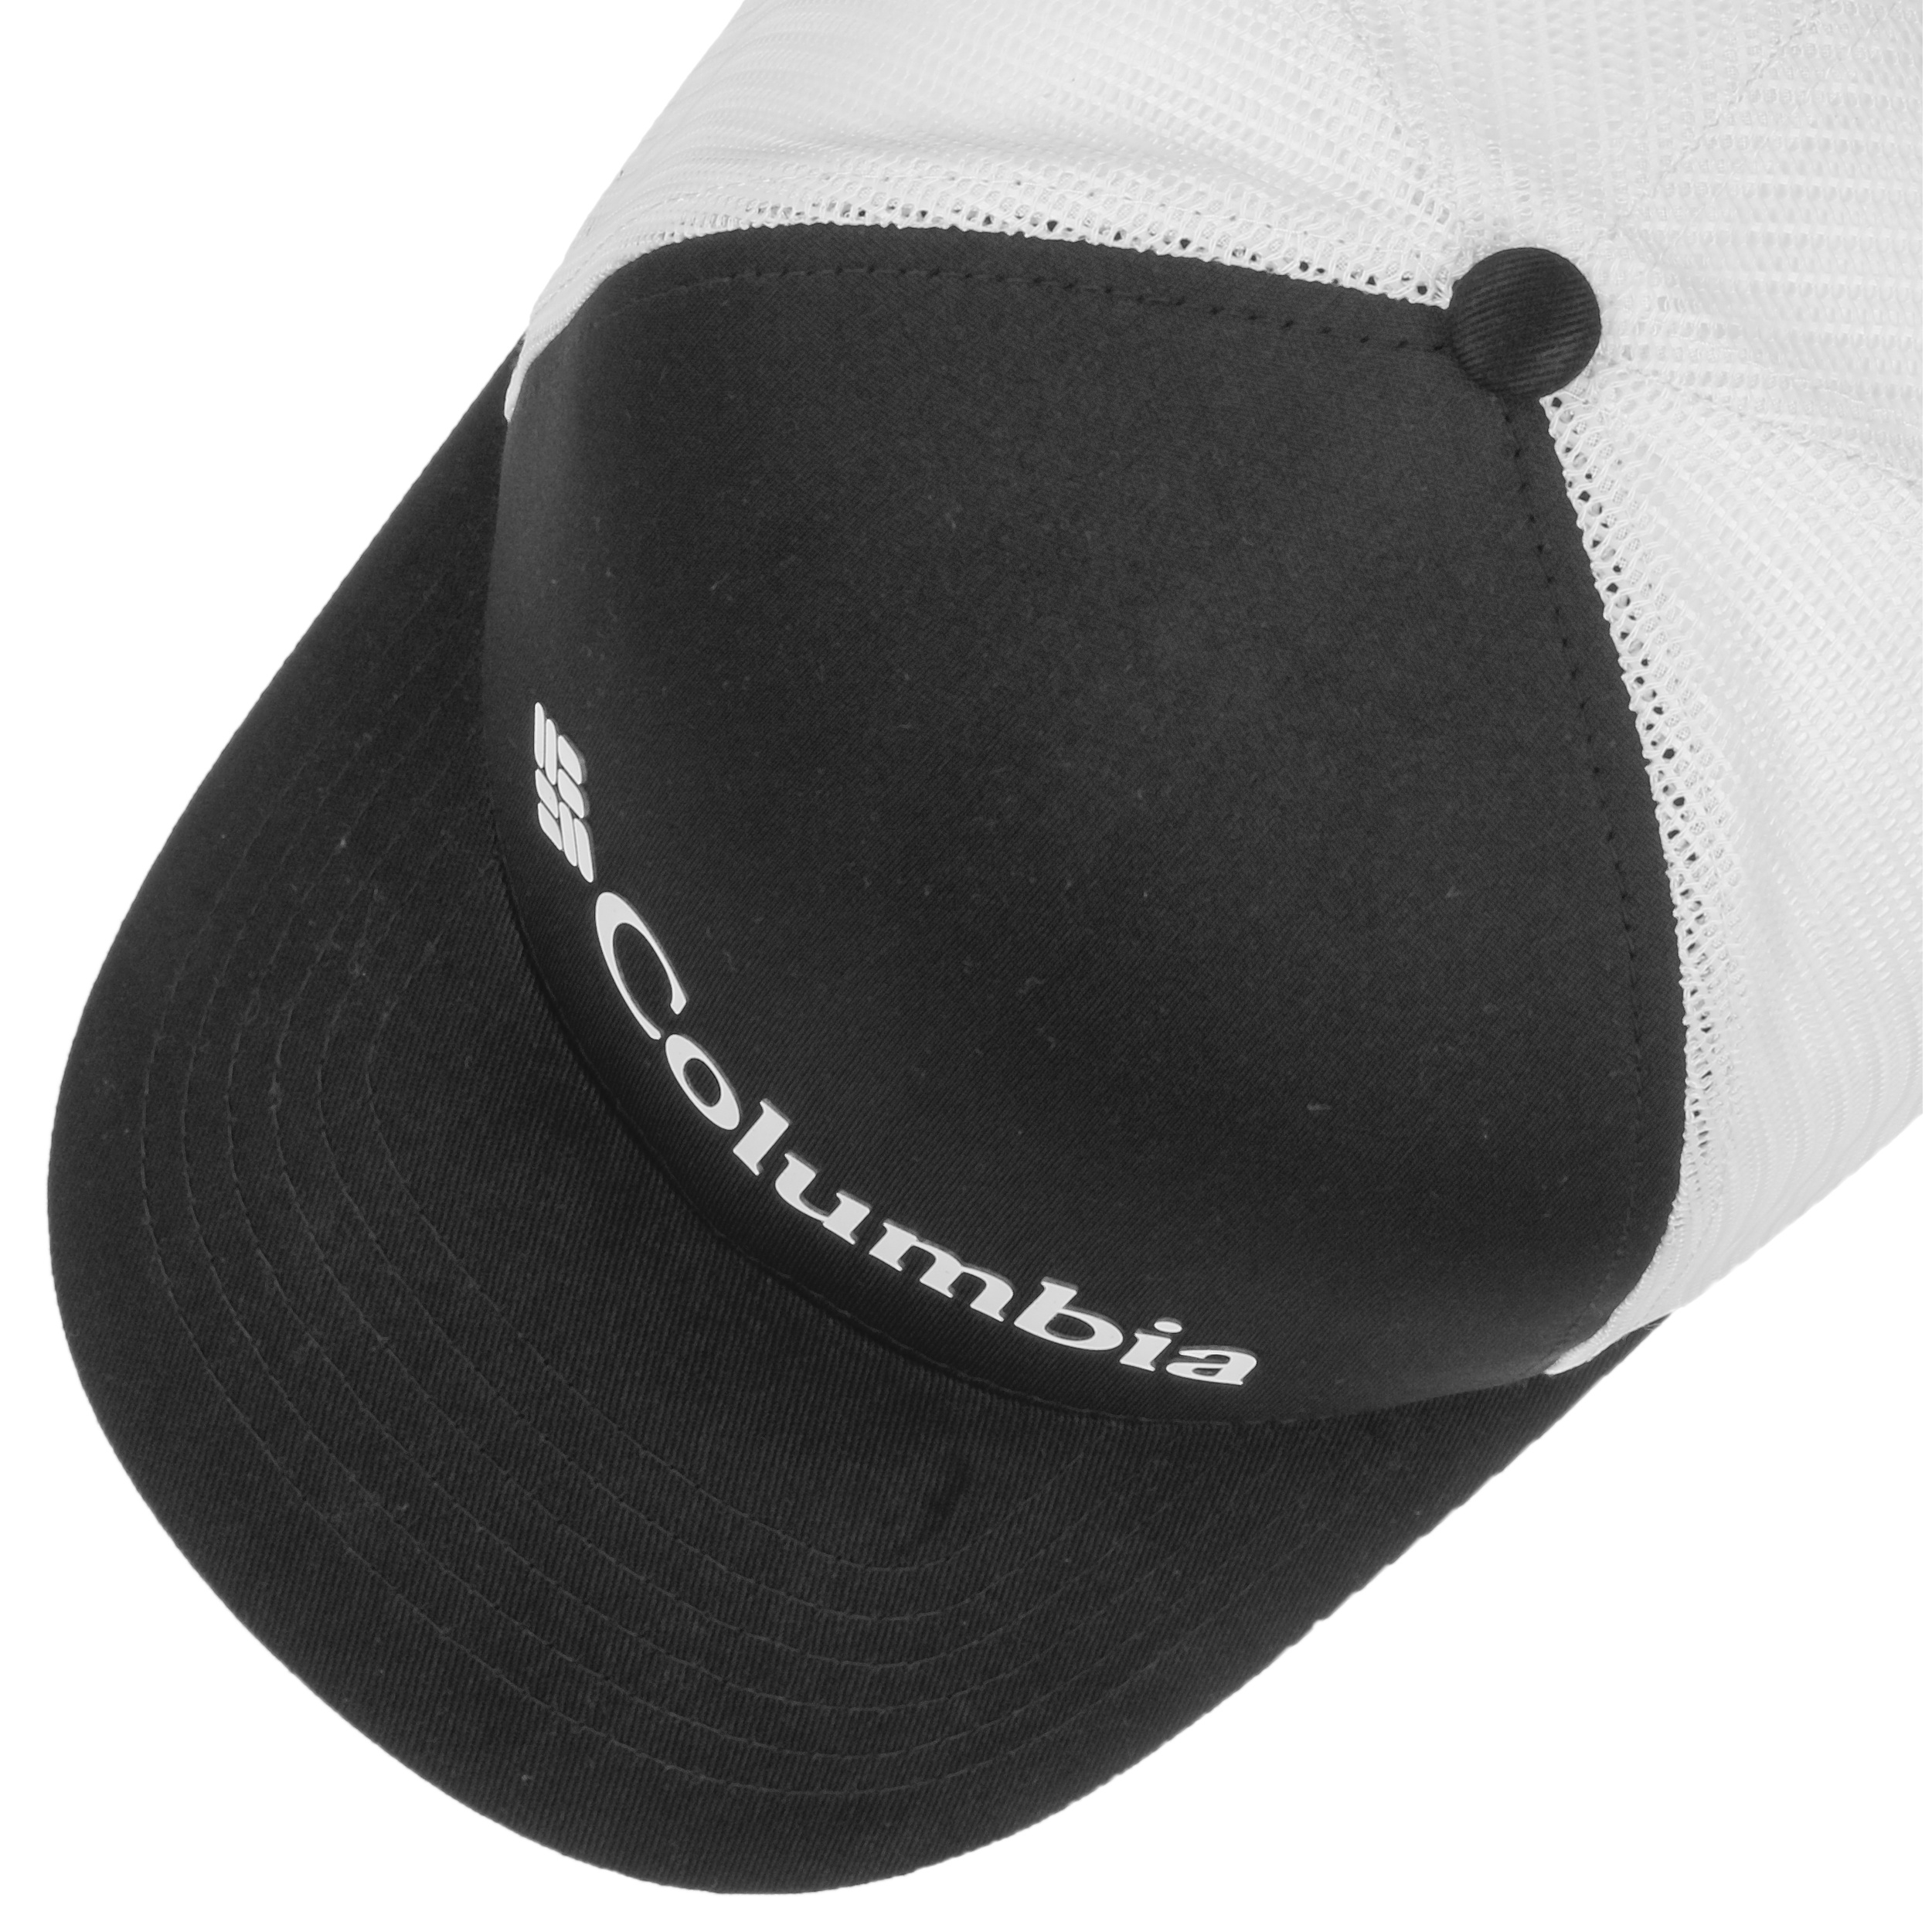 Casquette Trucker New Punchbowl by Columbia